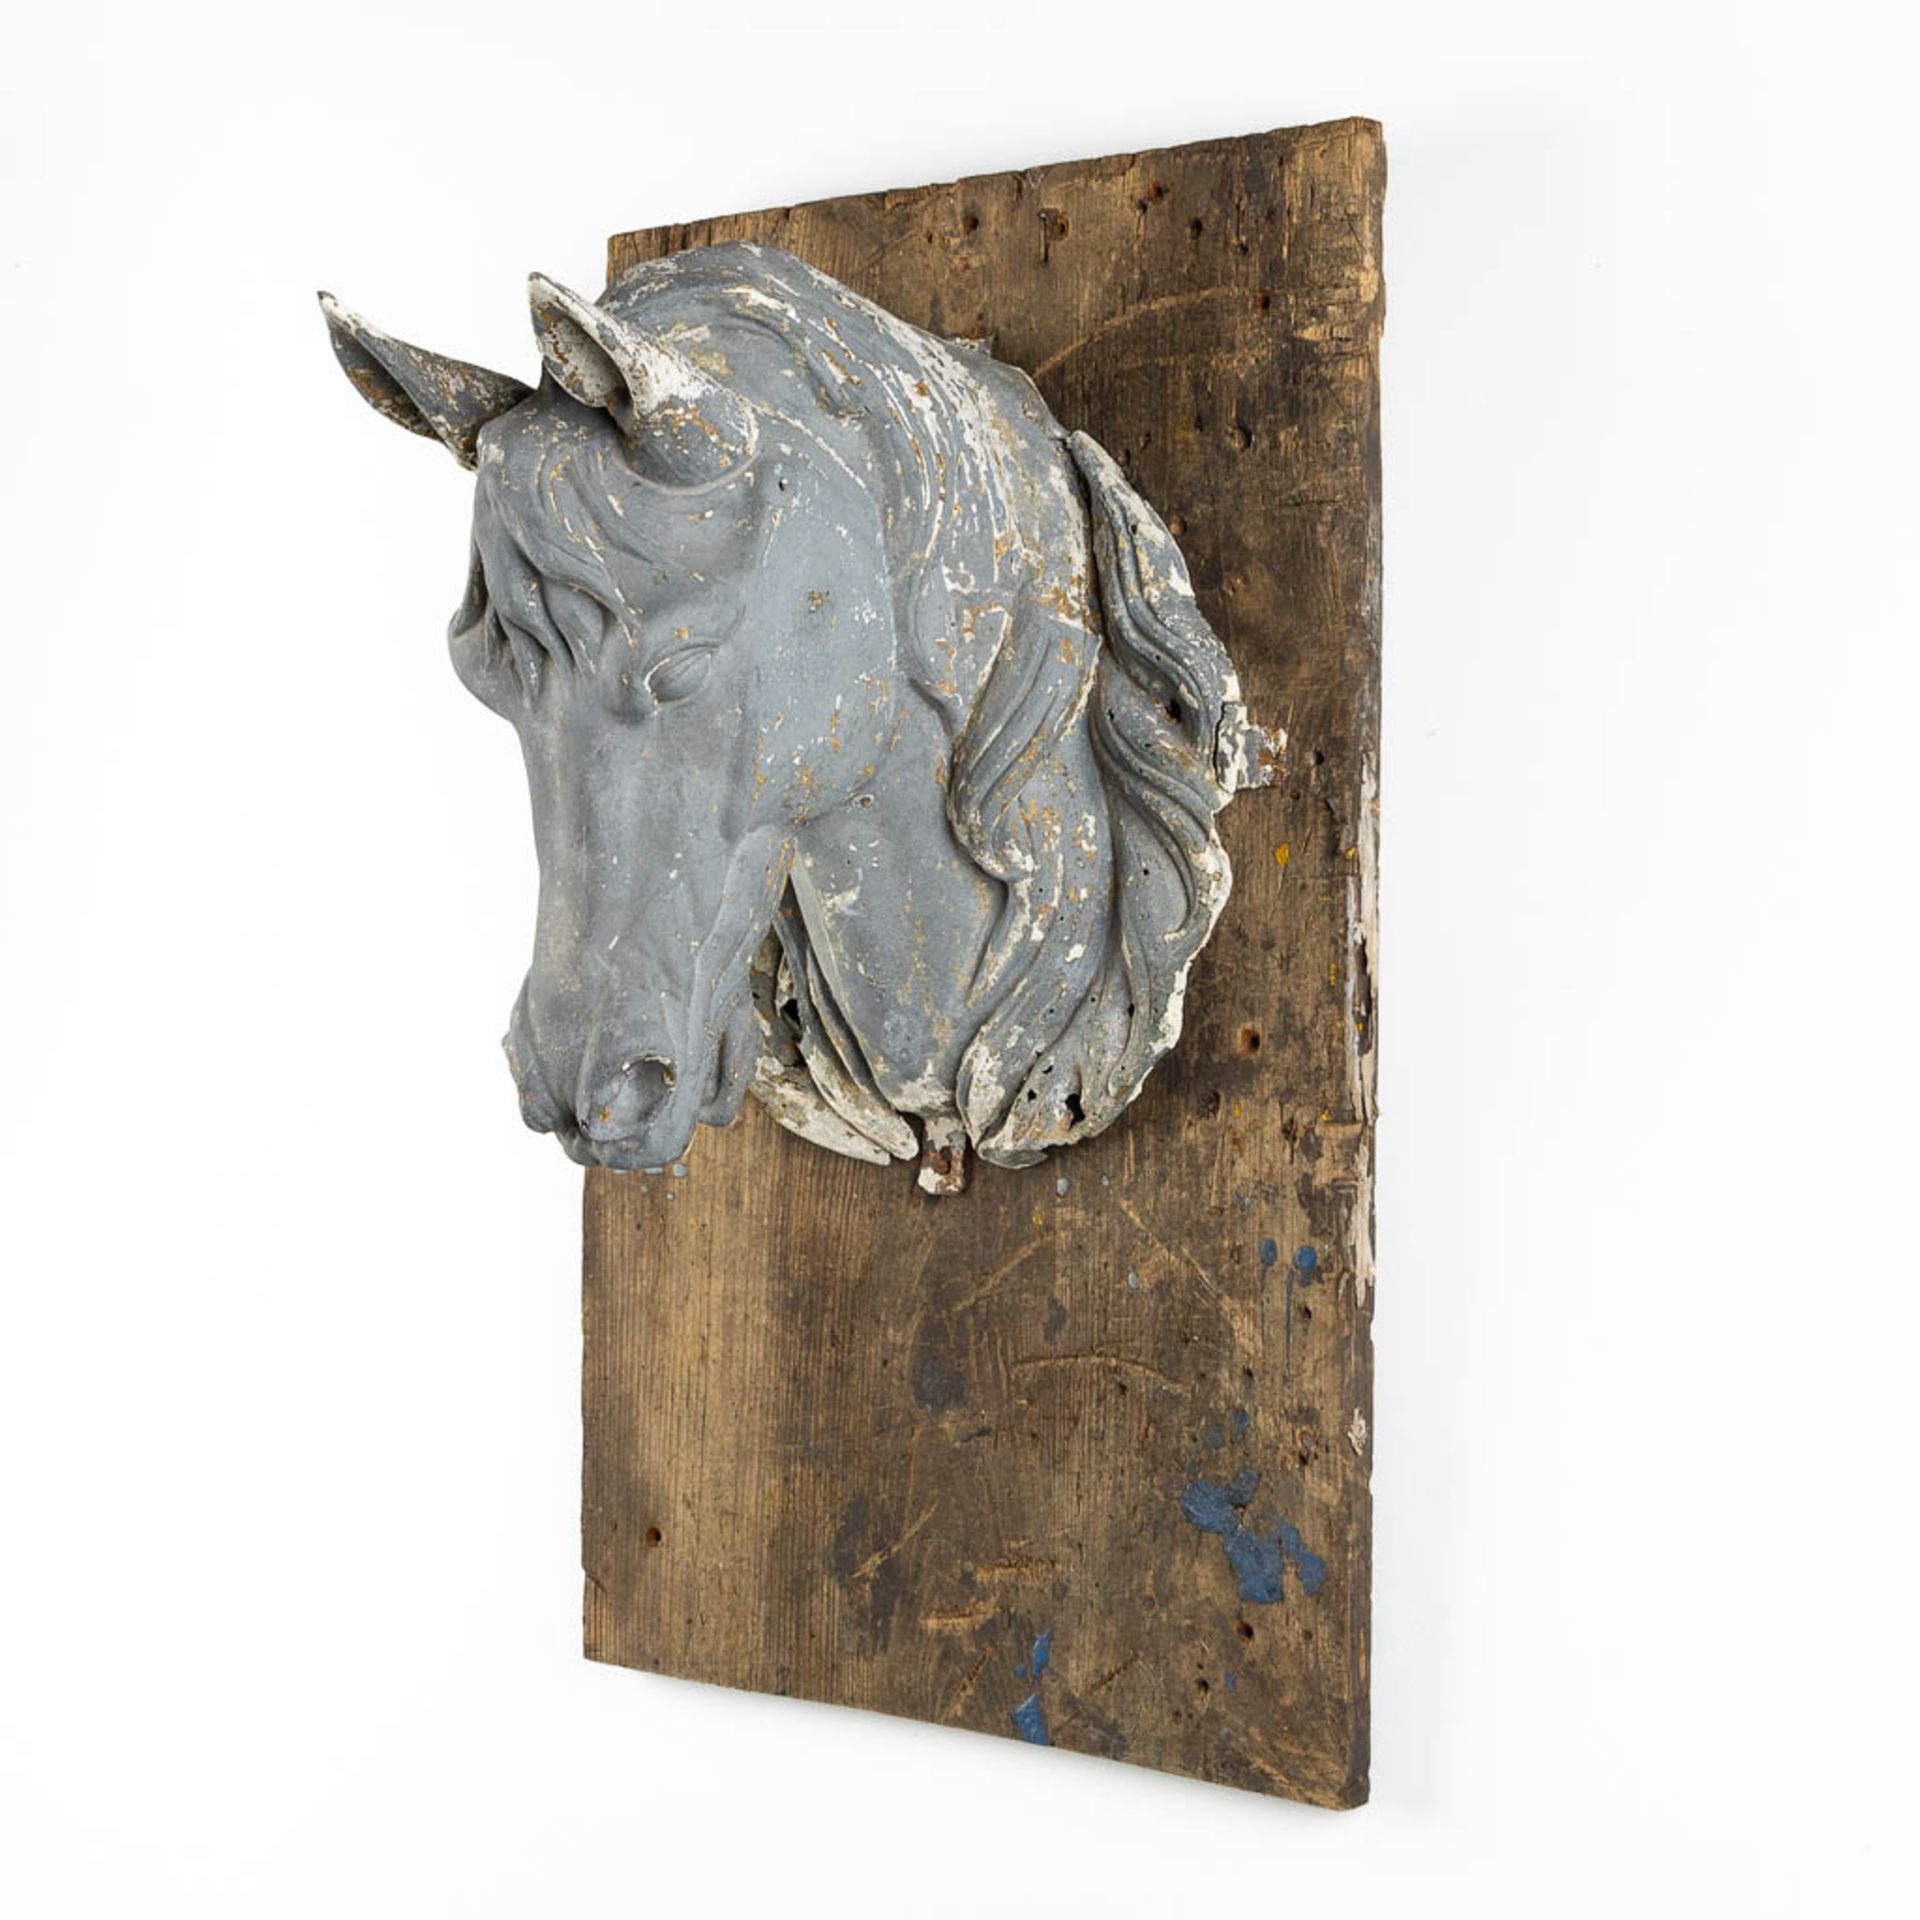 An antique zinc Horse Head, mounted on a wood board. Circa 1920. (L:40 x W:39 x H:44 cm) - Image 6 of 13